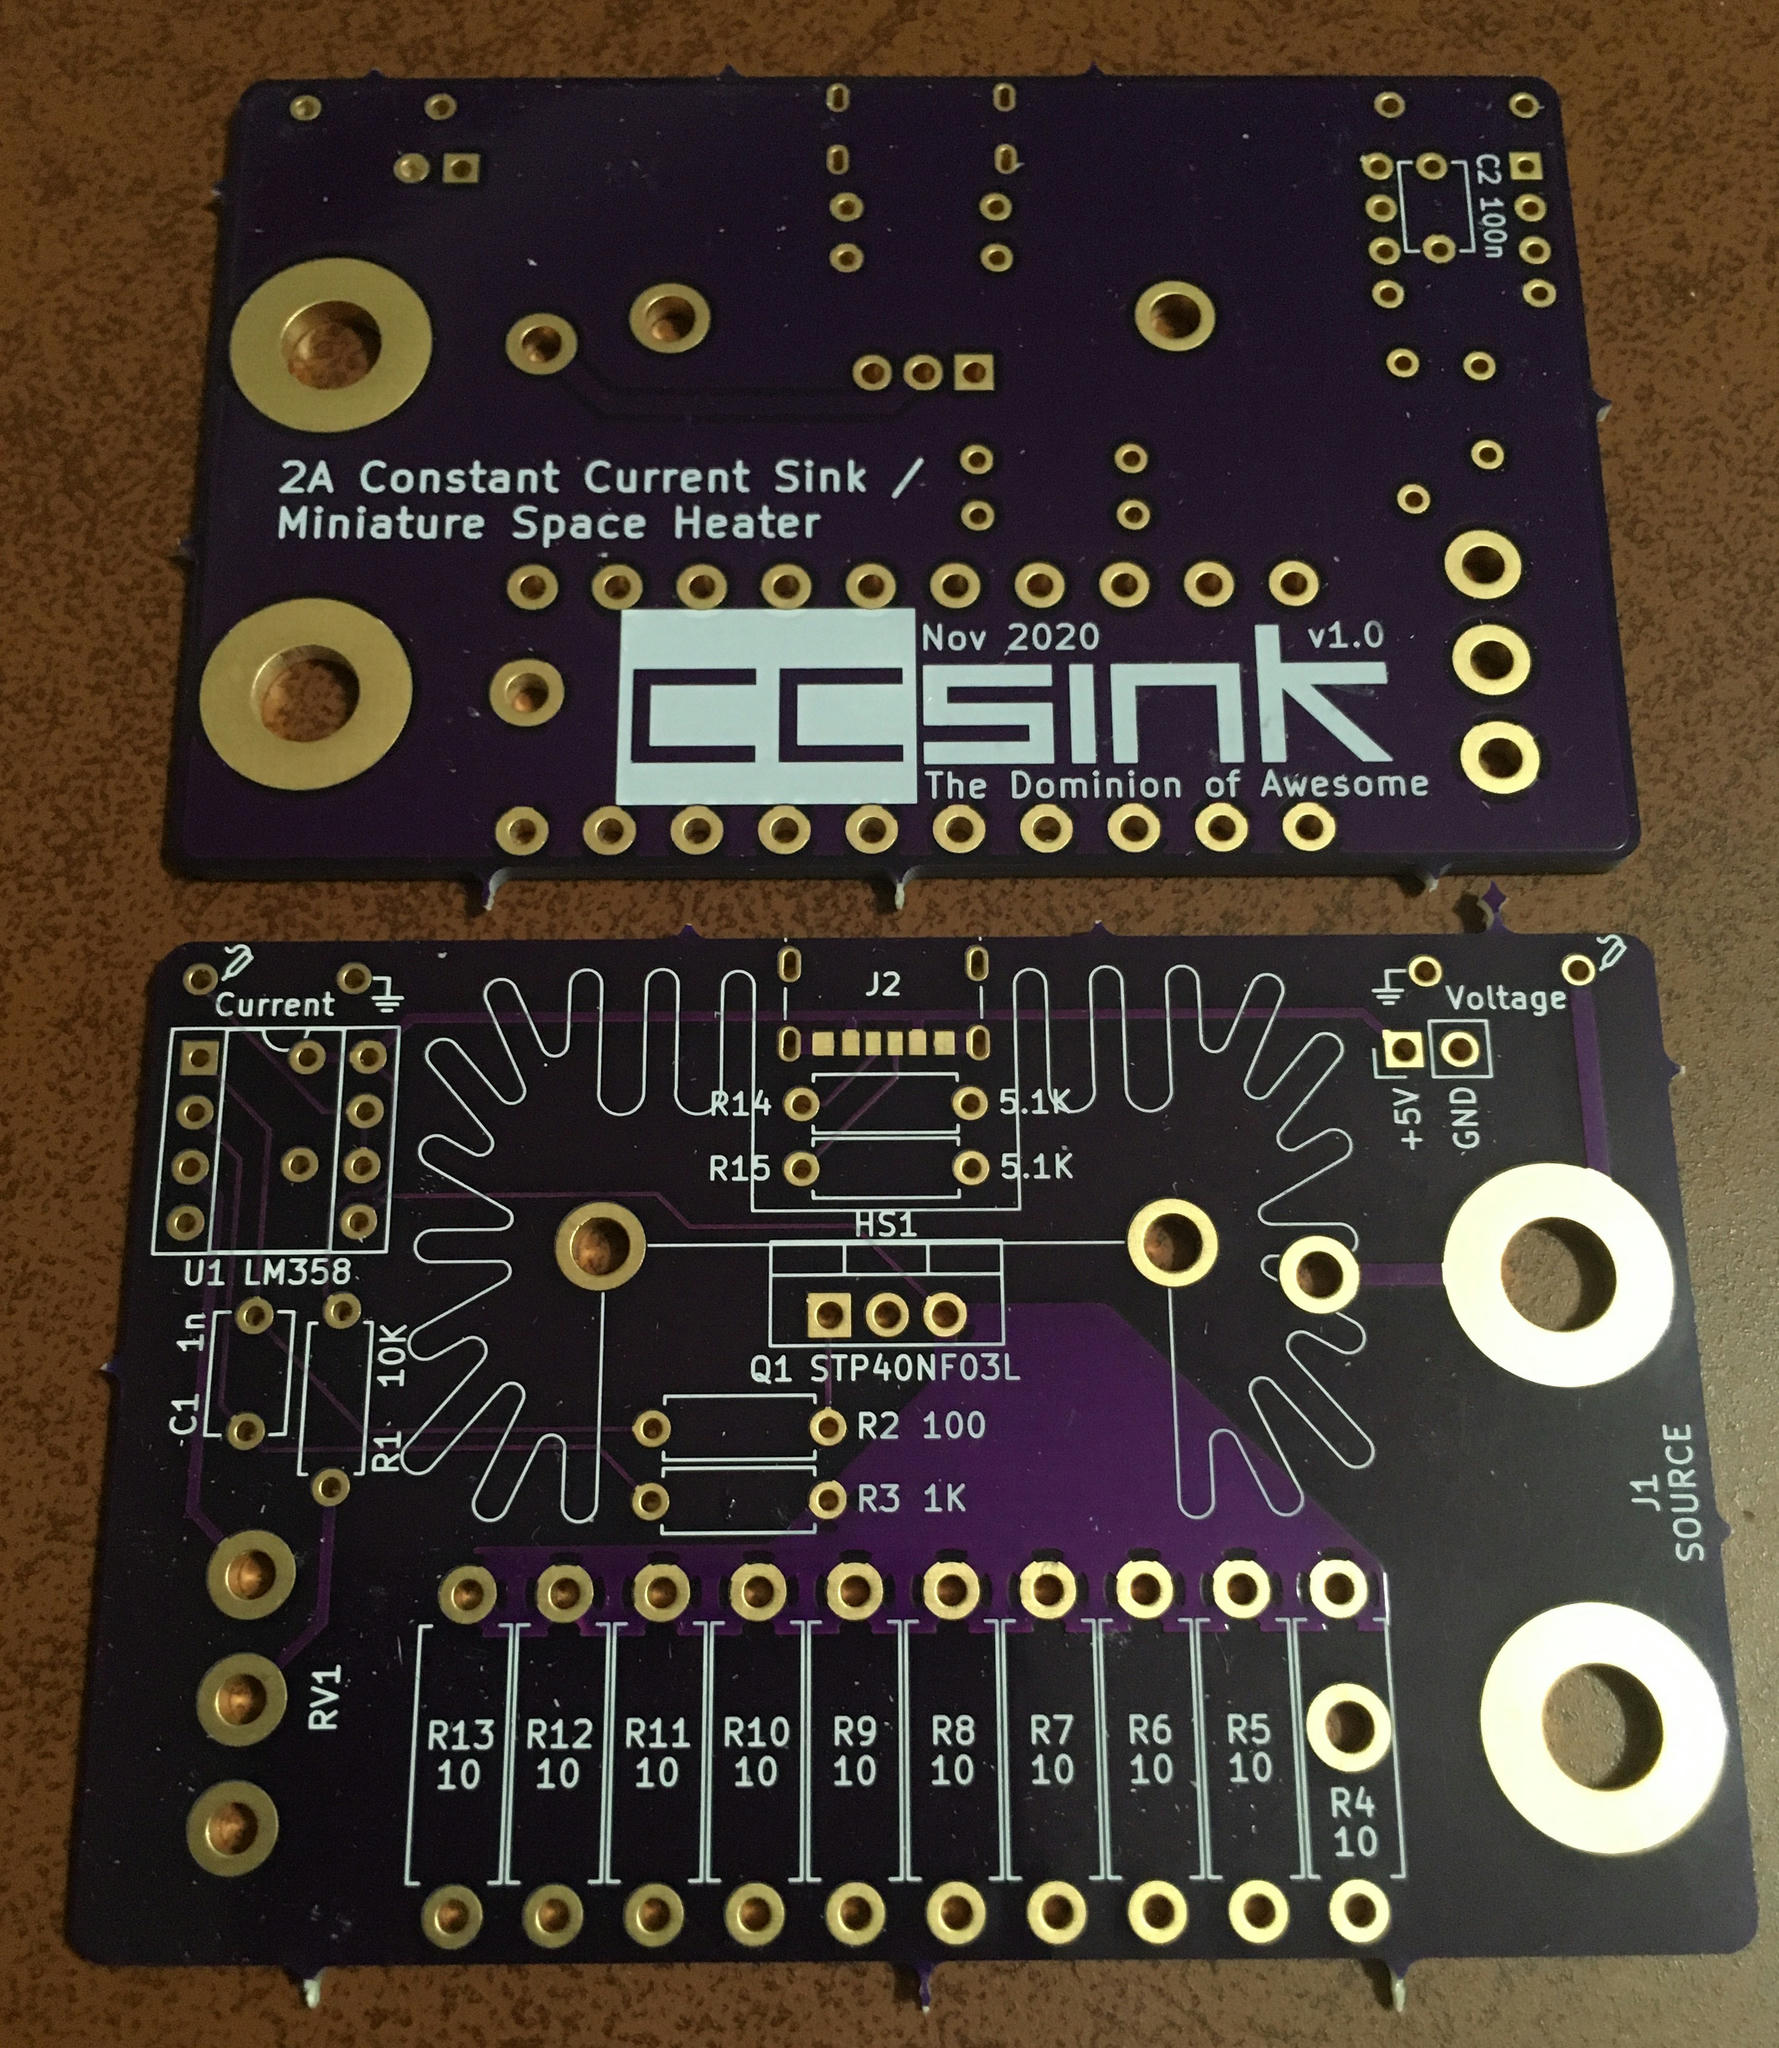 The CC SINK PCB, front and back